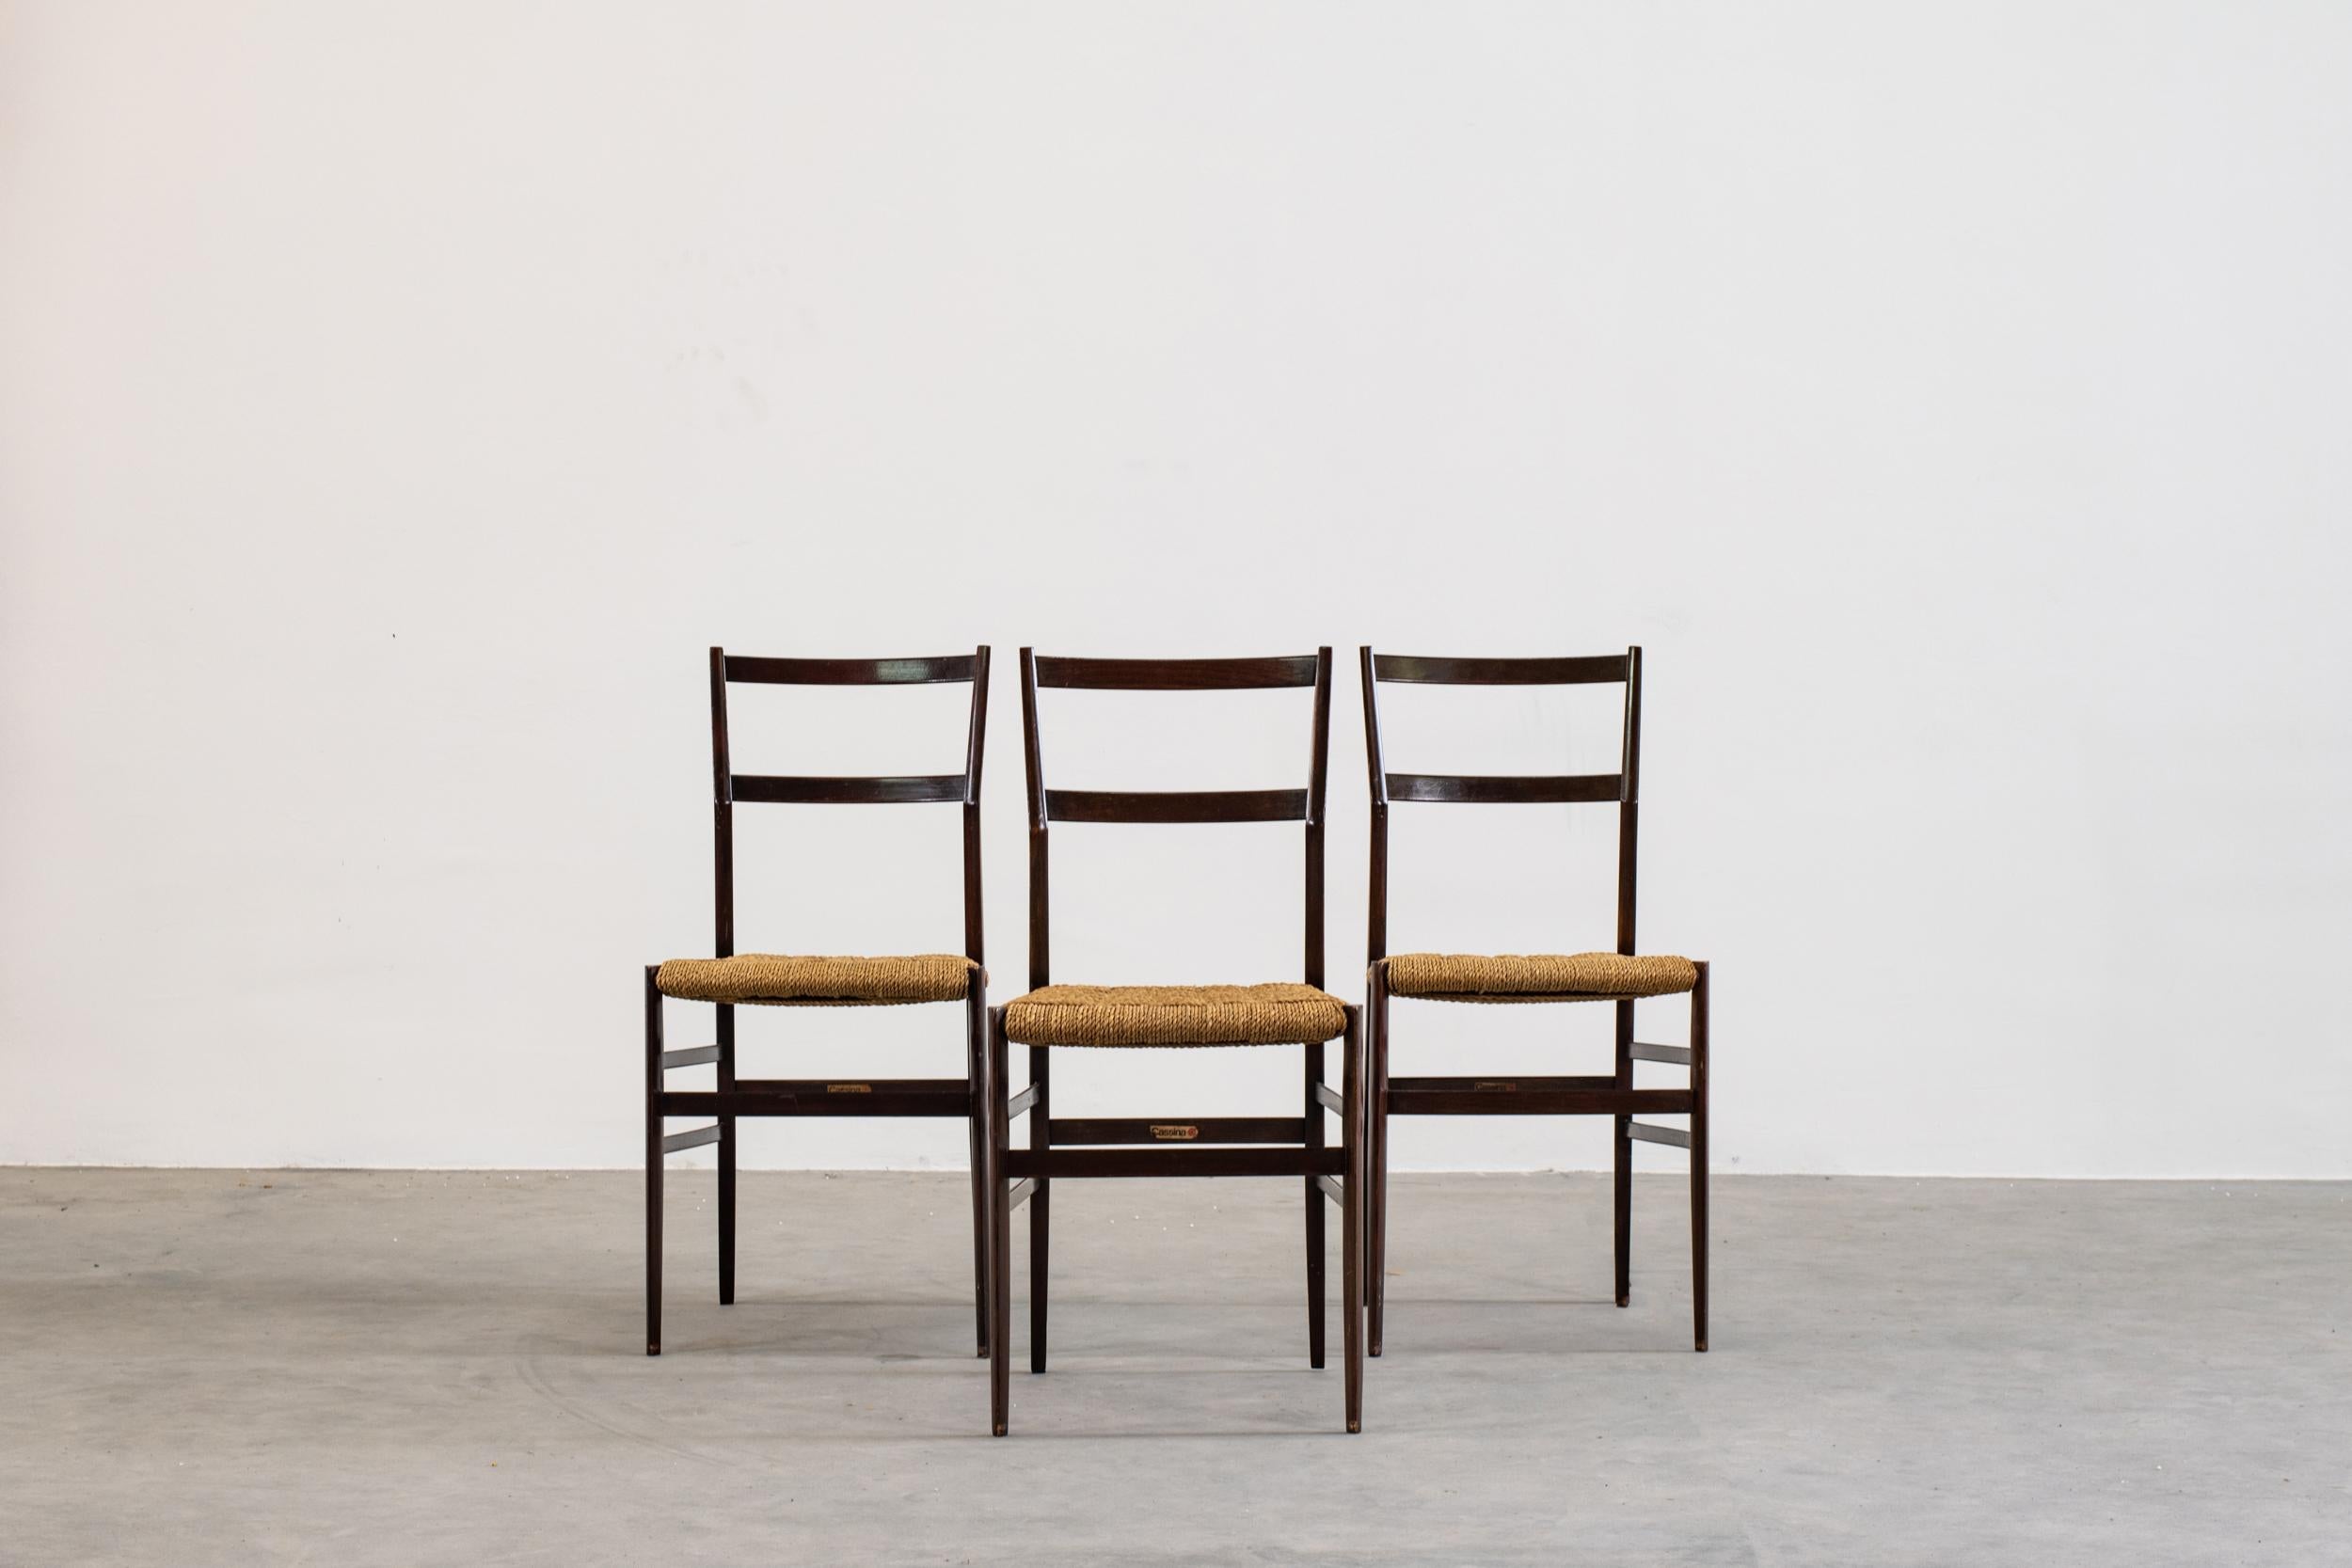 Set of three Superleggera dining chairs with a structure in solid lacquered ashwood, legs with a triangular tube of only 18 millimeters and minimum weight of 1,700 grams, and a seat in hand-woven straw.

Designed by Gio Ponti and manufactured since